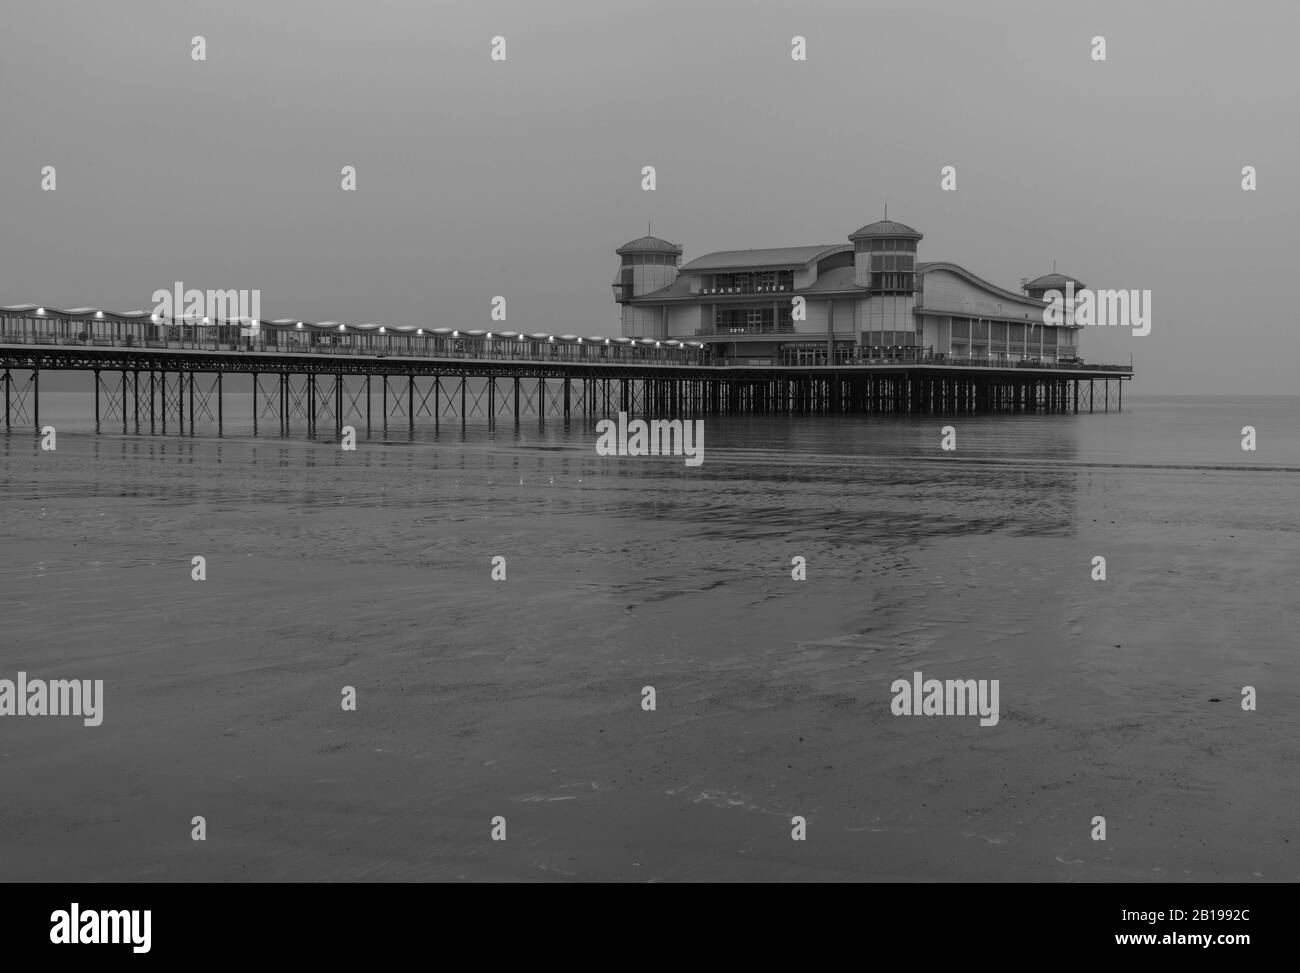 The Grand Pier Weston-Super-Mare Somerset England Uk. Avril 2019 Banque D'Images